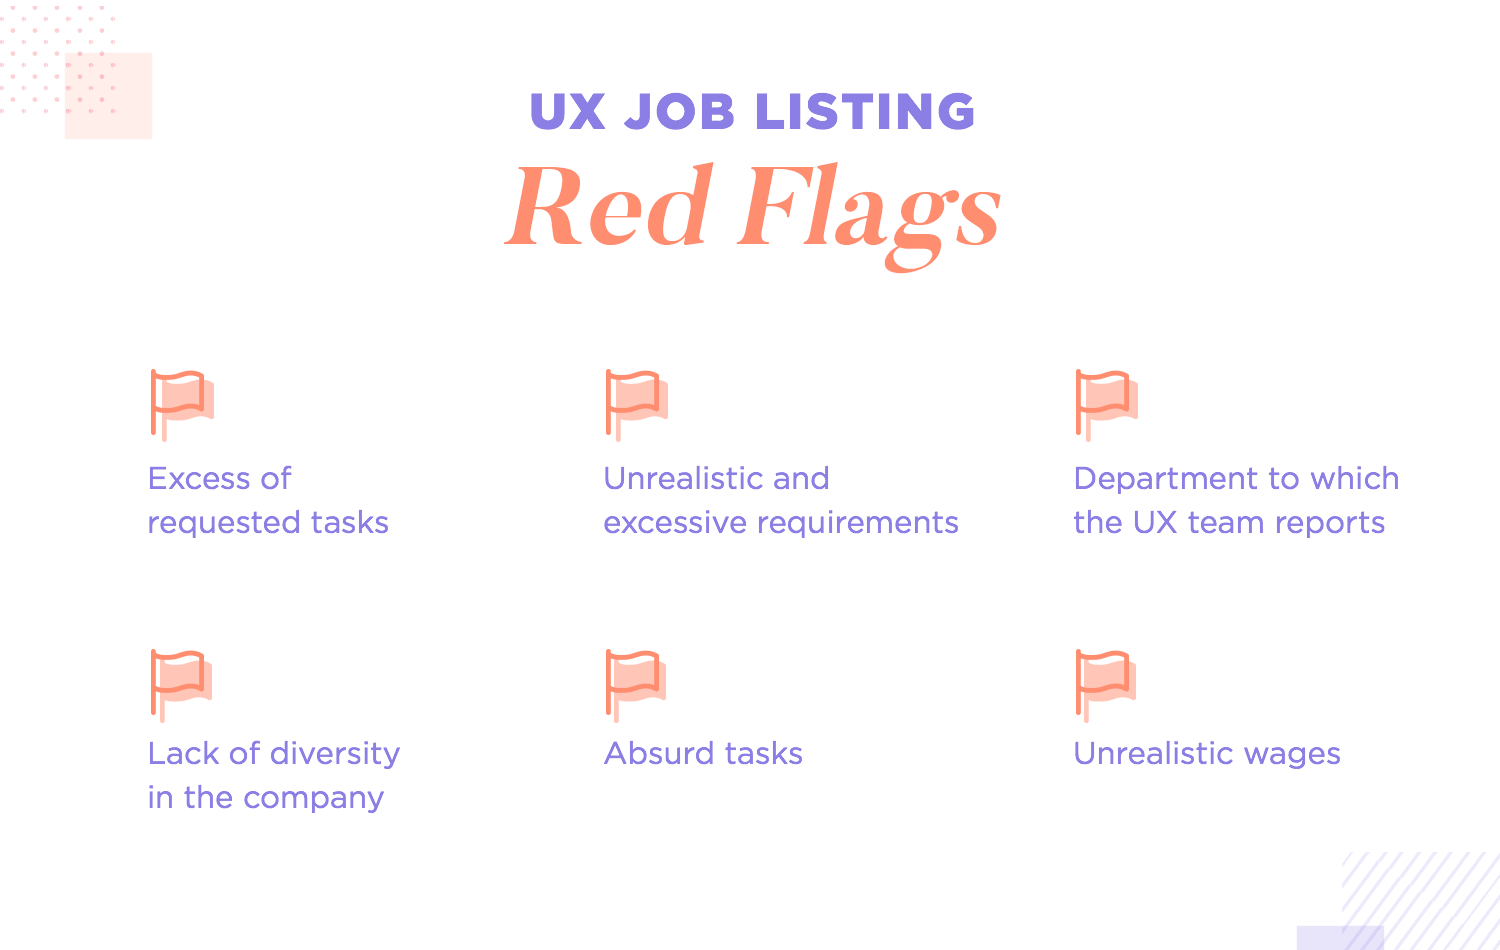 list of red flags to avoid in ux design job listings